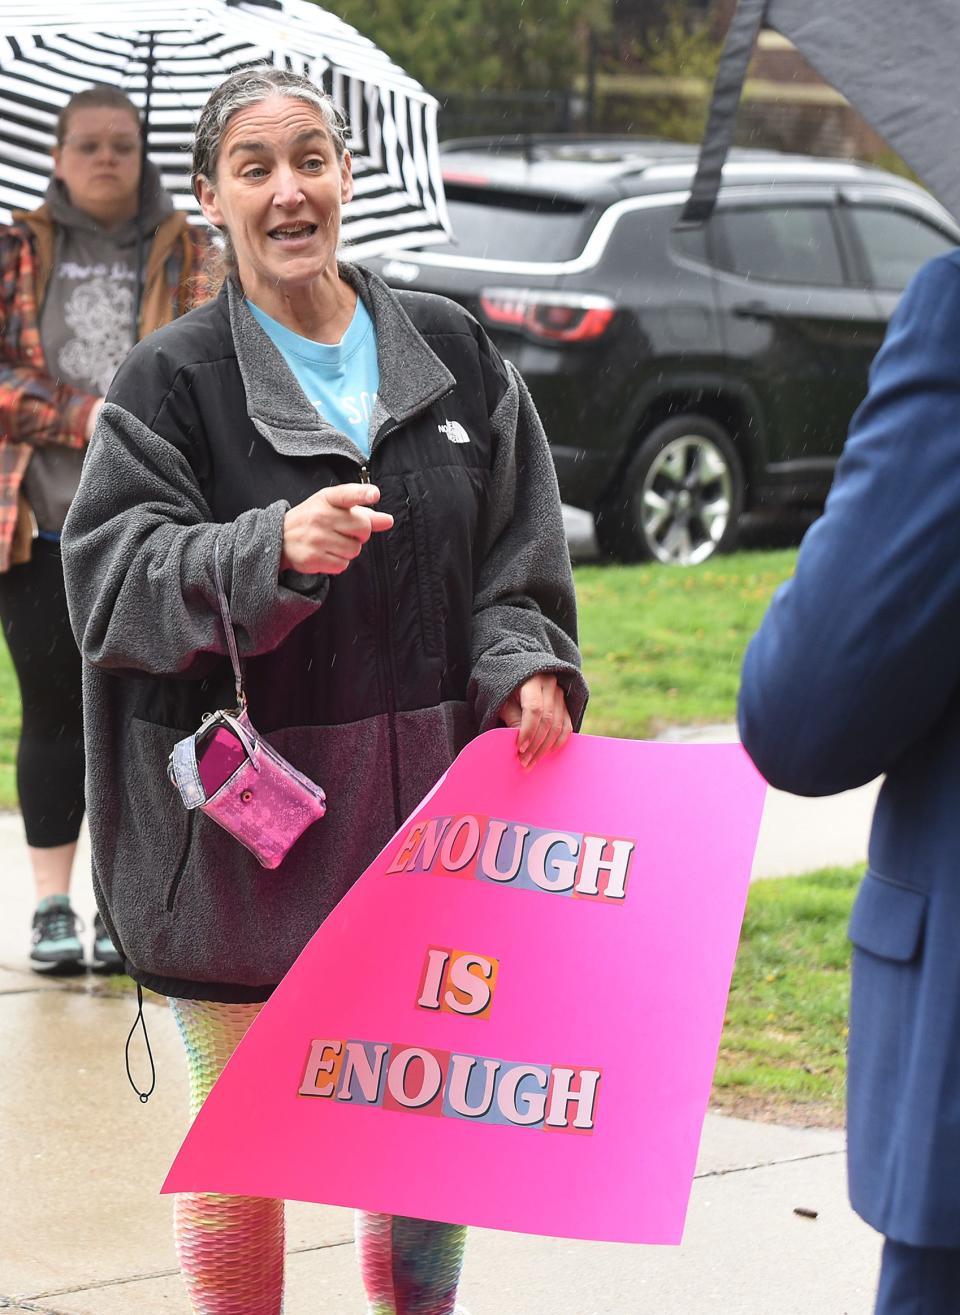 Jennifer Irbin, mother of student Trinity Small, speaks her concerns to Monroe Public Schools' superintendent Andrew Shaw at last spring's Justice for Gary rally at Monroe Middle School.